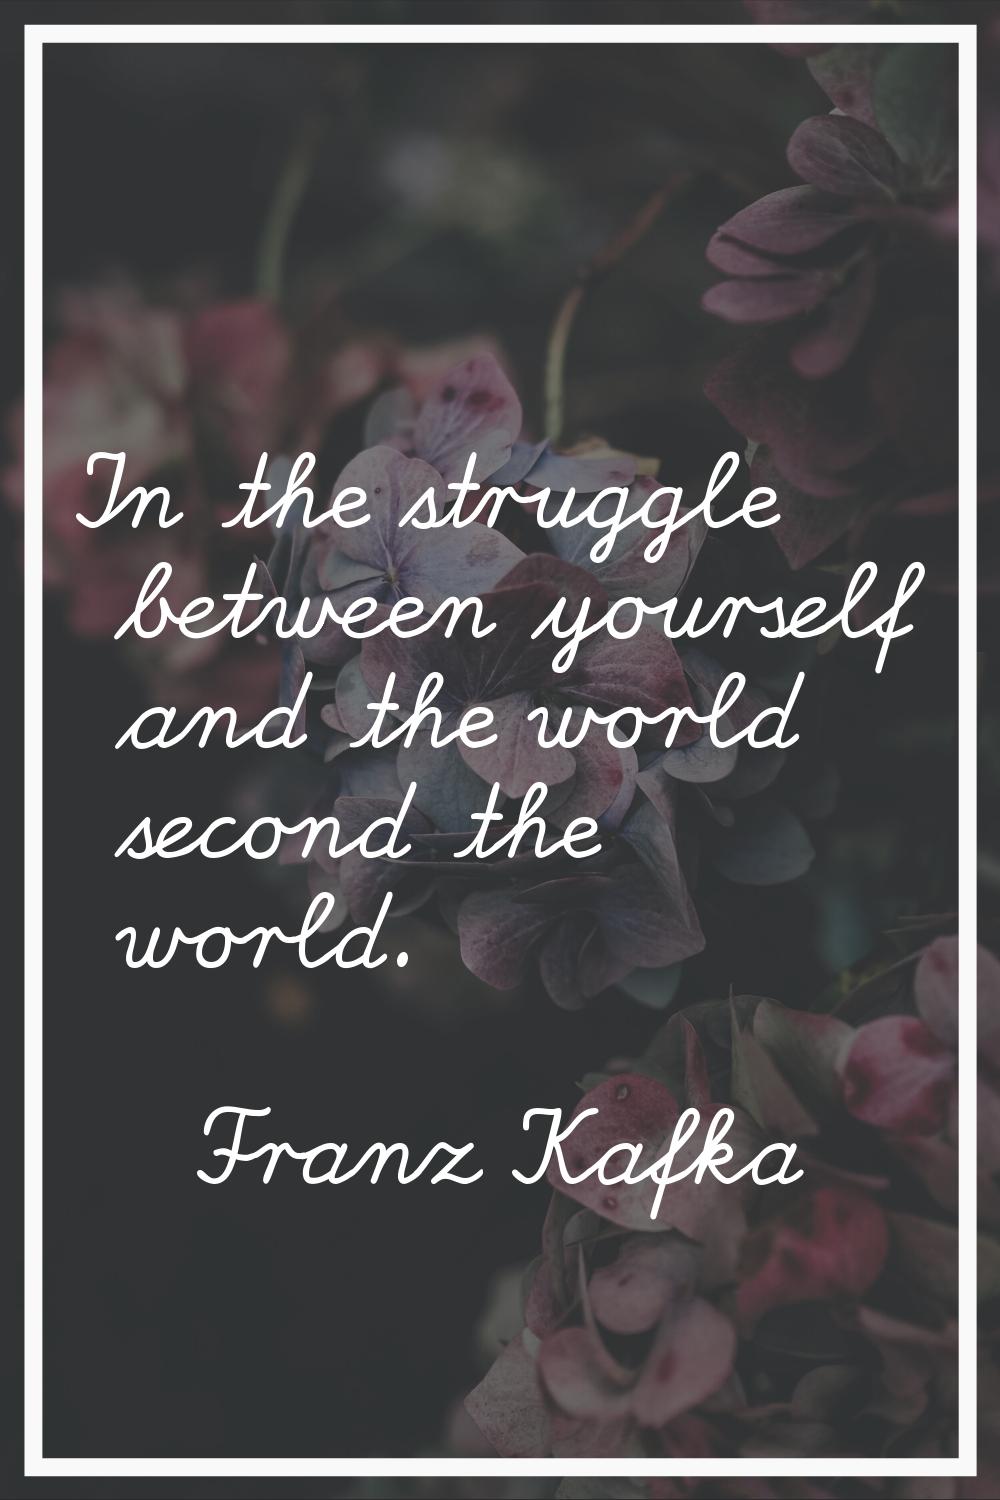 In the struggle between yourself and the world second the world.